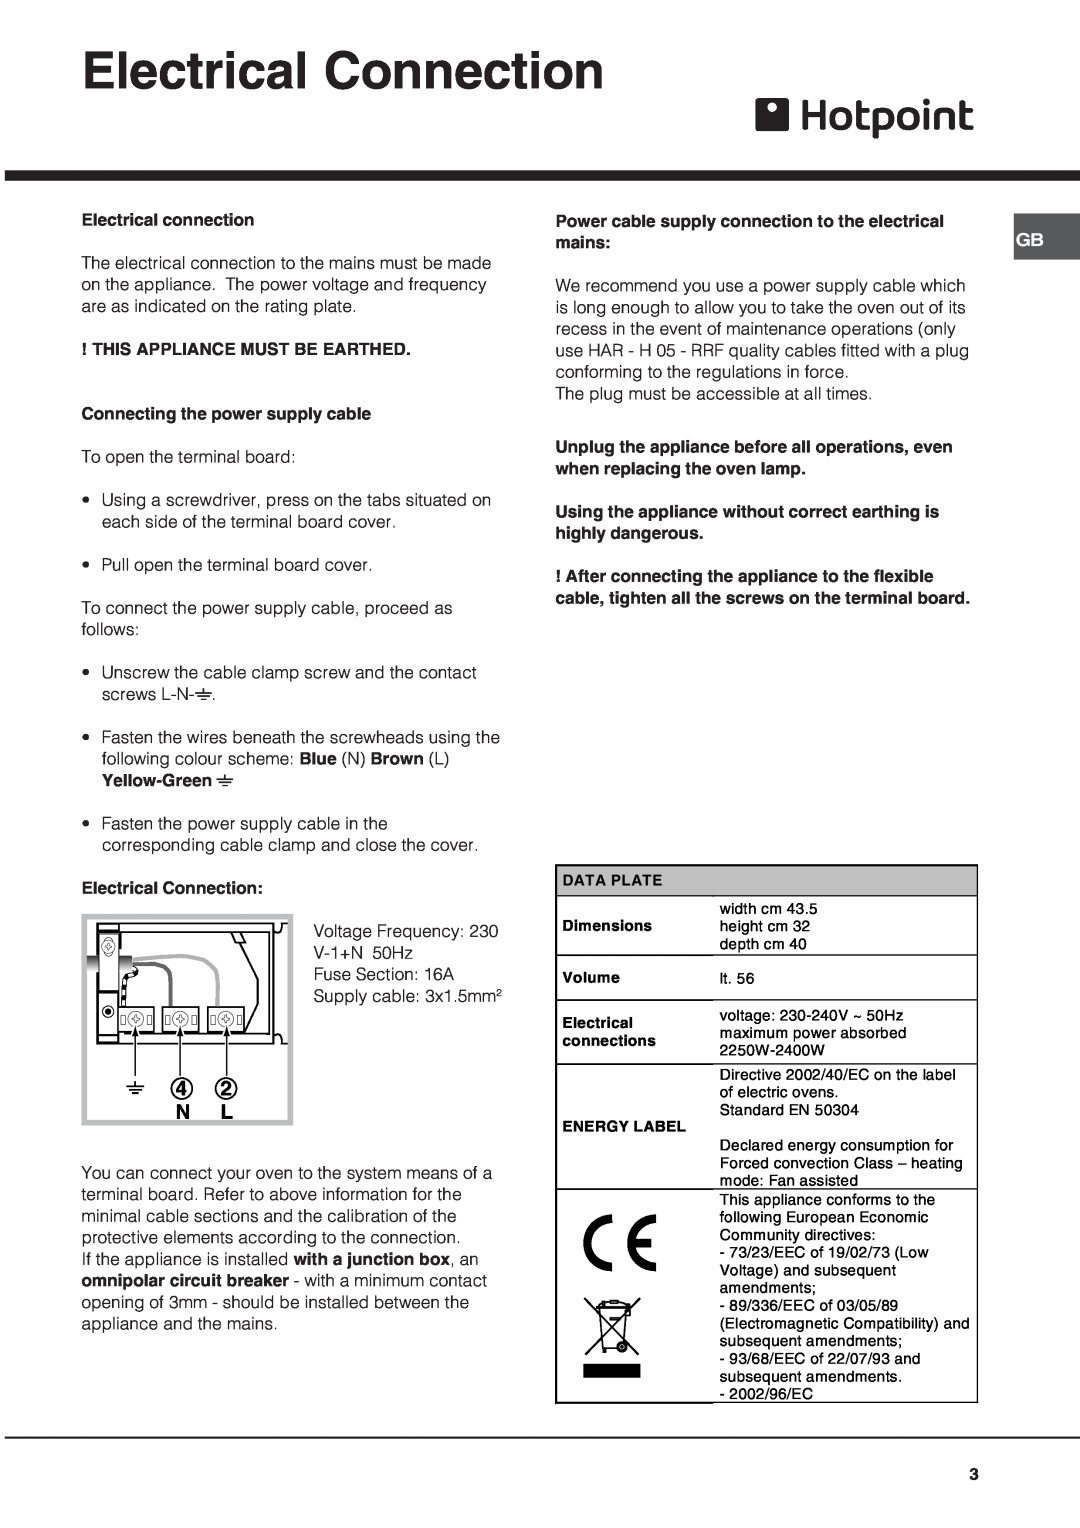 Hotpoint SY36X, SY37K, SY37B, SY37W, SY36B, SY36K, SY37X, SY36W operating instructions Electrical Connection, 4 2 N L 